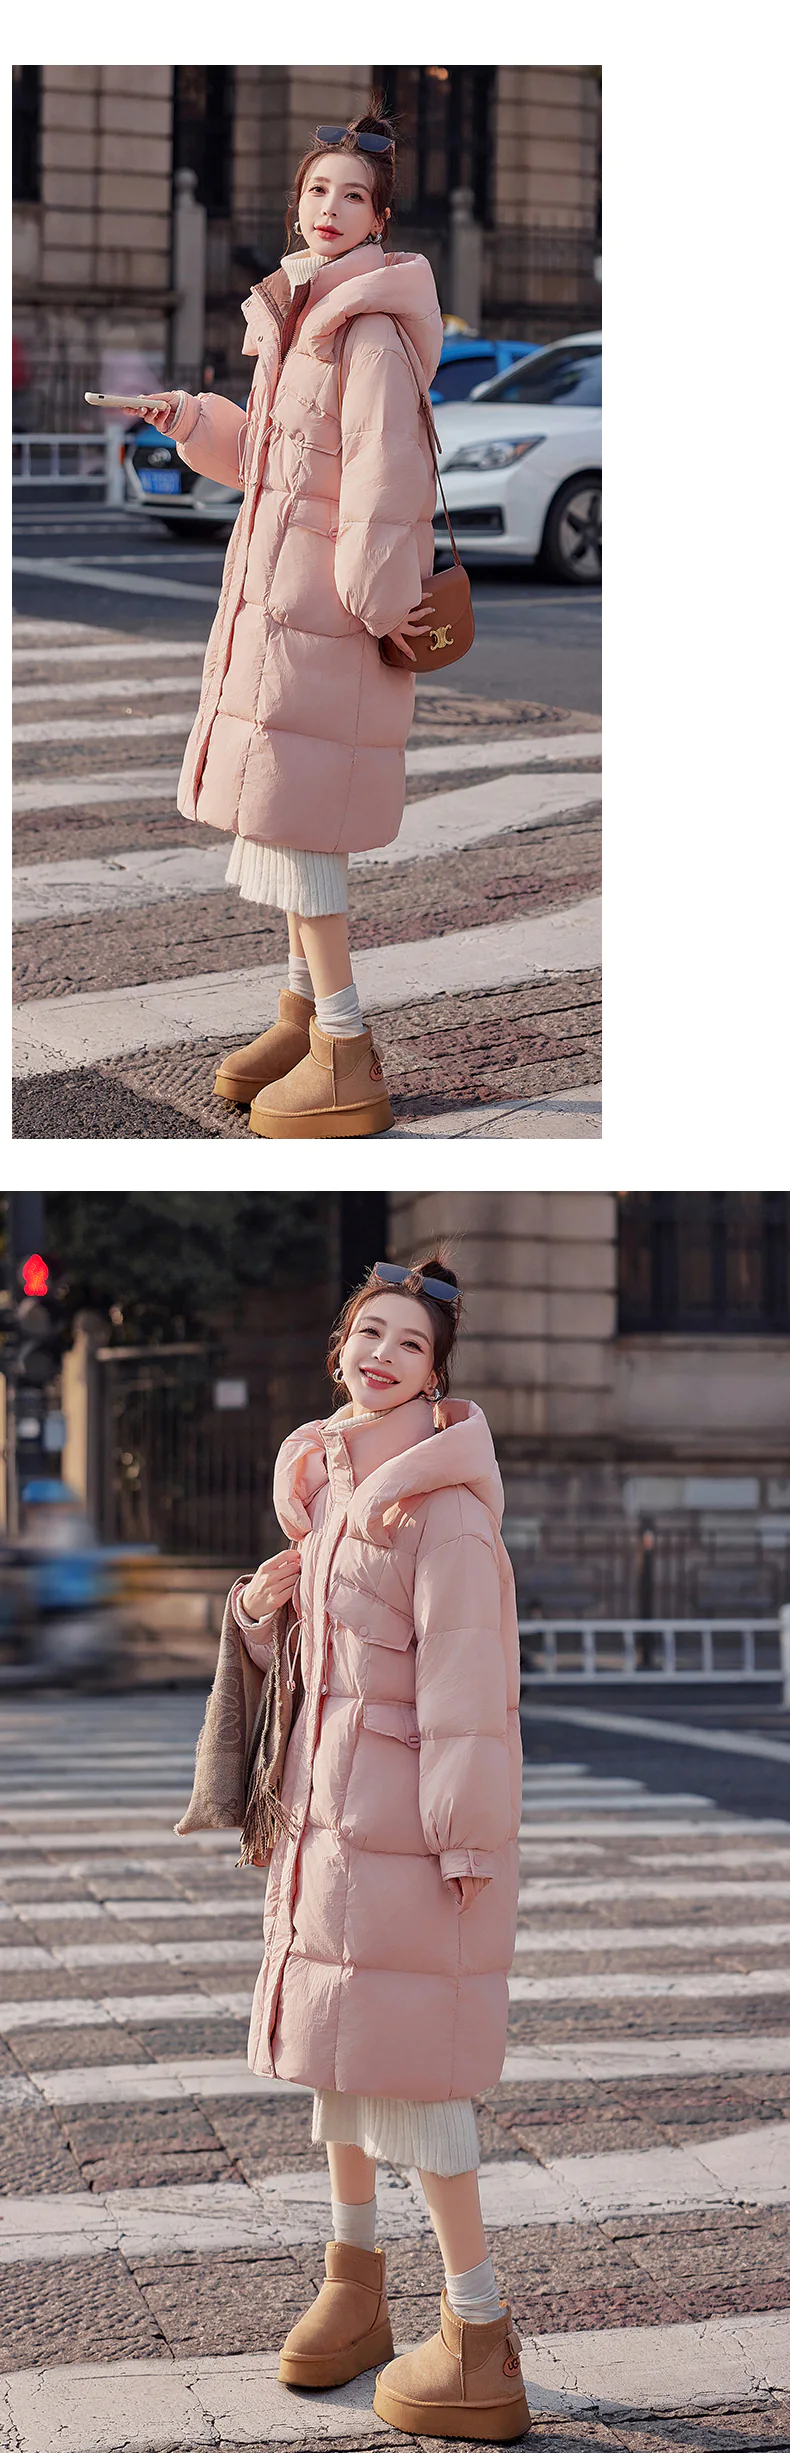 White-Duck-Down-Hooded-Thick-Long-Warm-Puffer-Jacket-Winter-Coat18